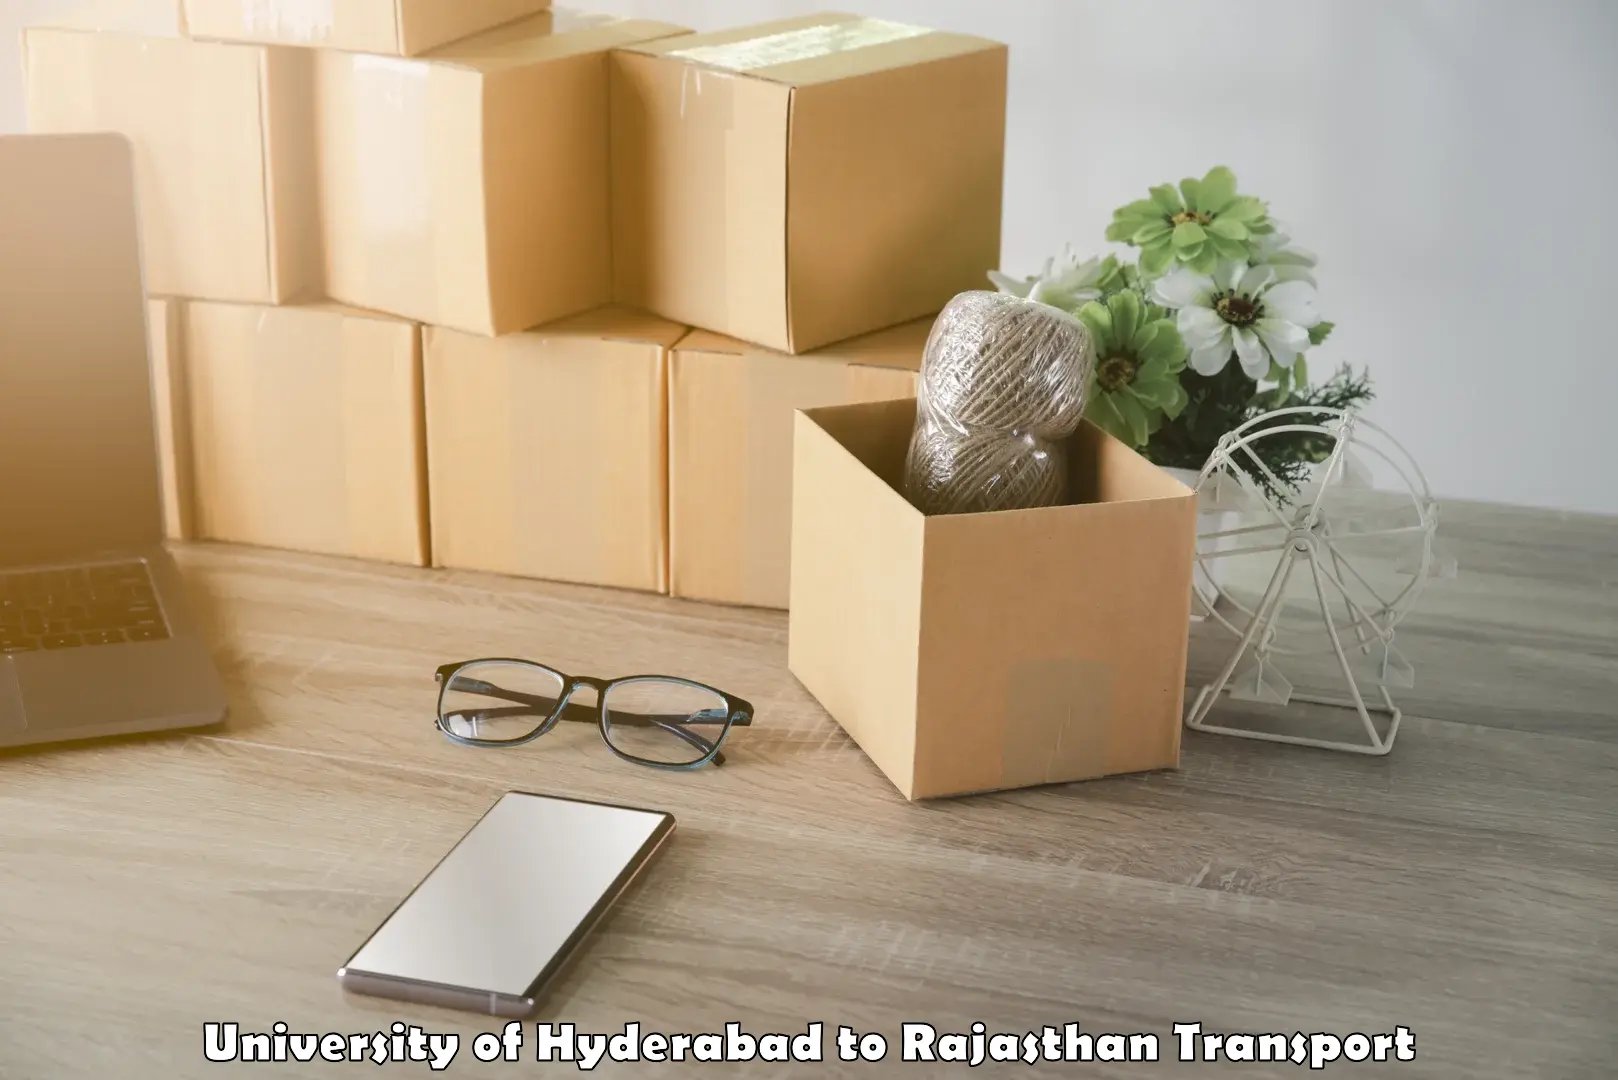 Vehicle transport services in University of Hyderabad to Rajasthan